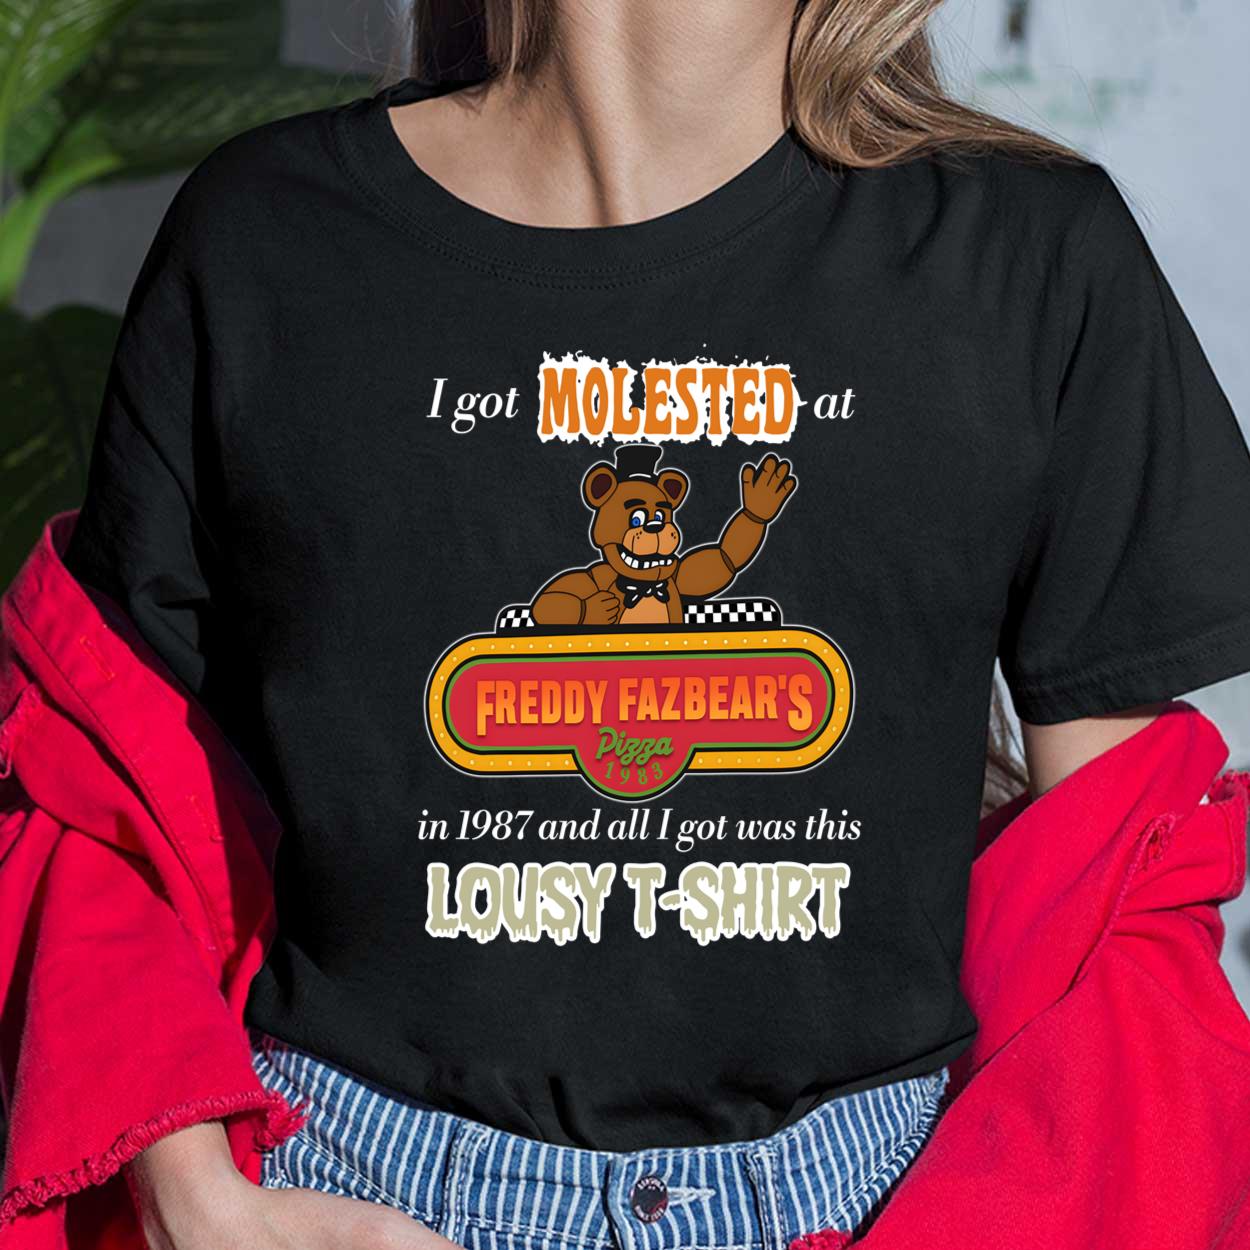 I Got Molested At Freddy Fazbear's Pizza In 1987 And All I Got Was This ...